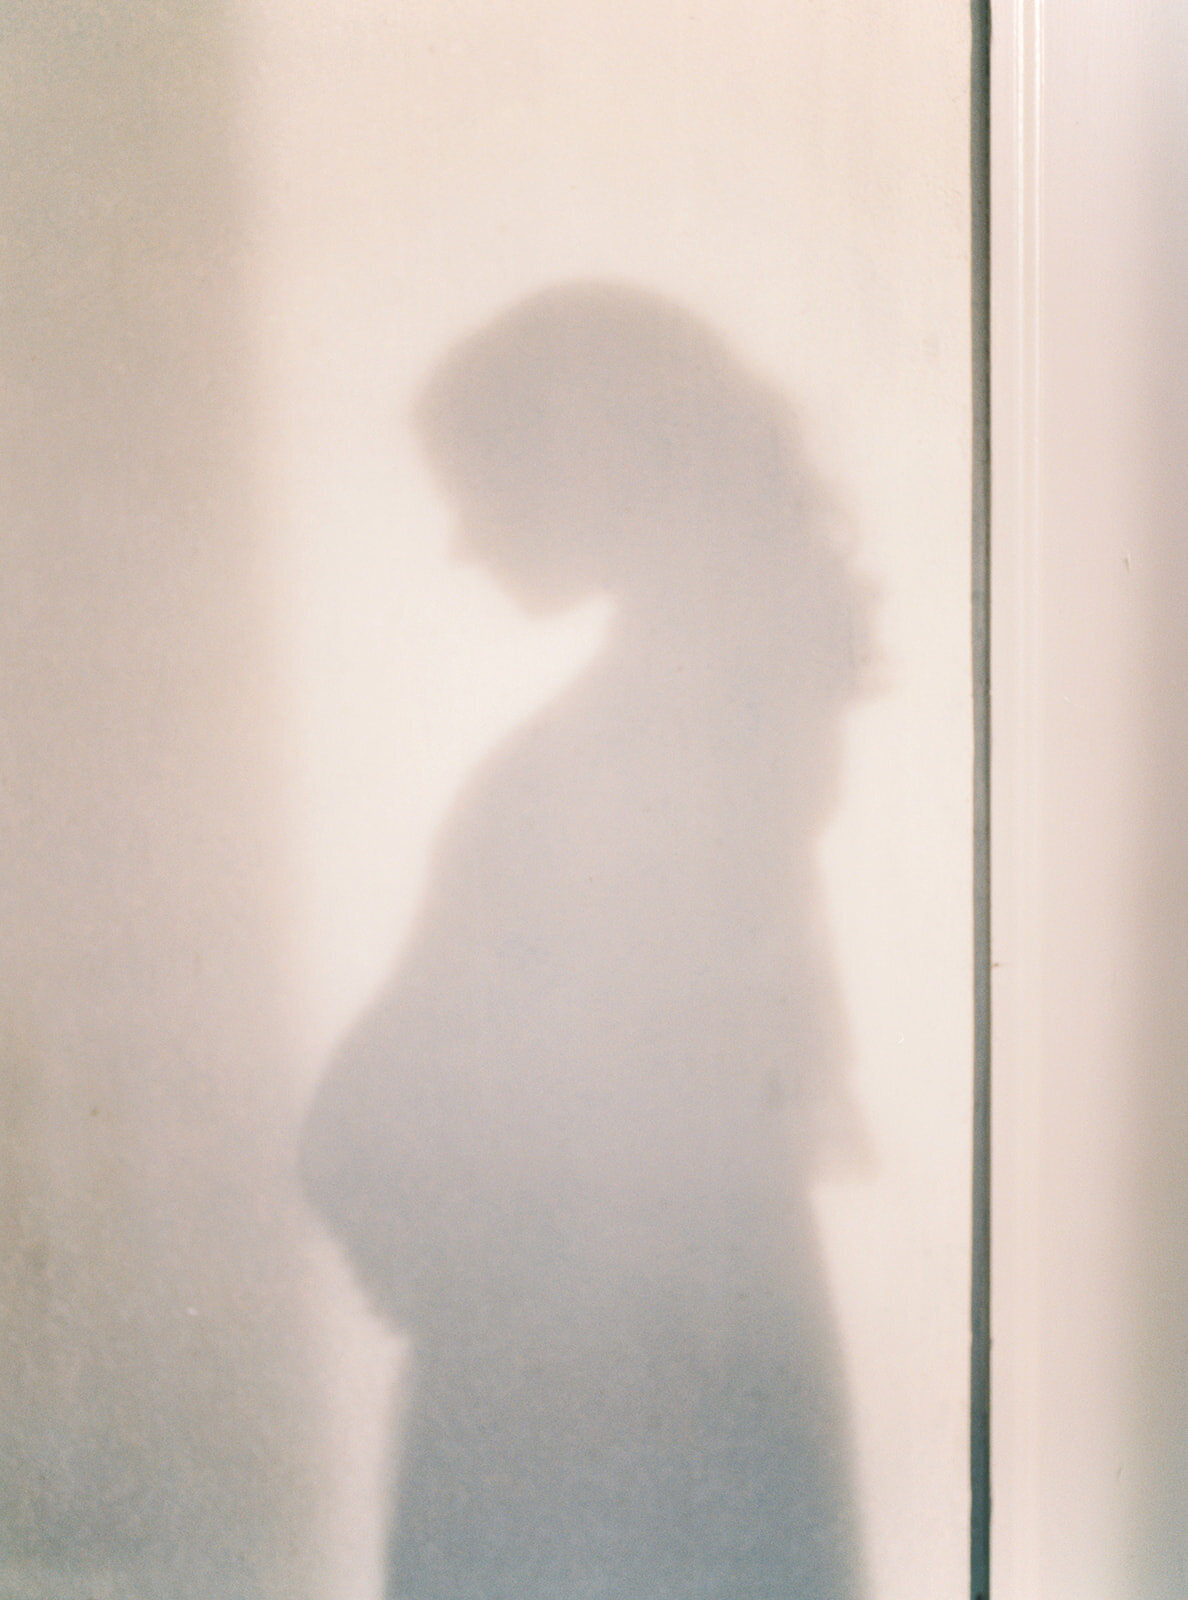 Shadow of an expecting mother.